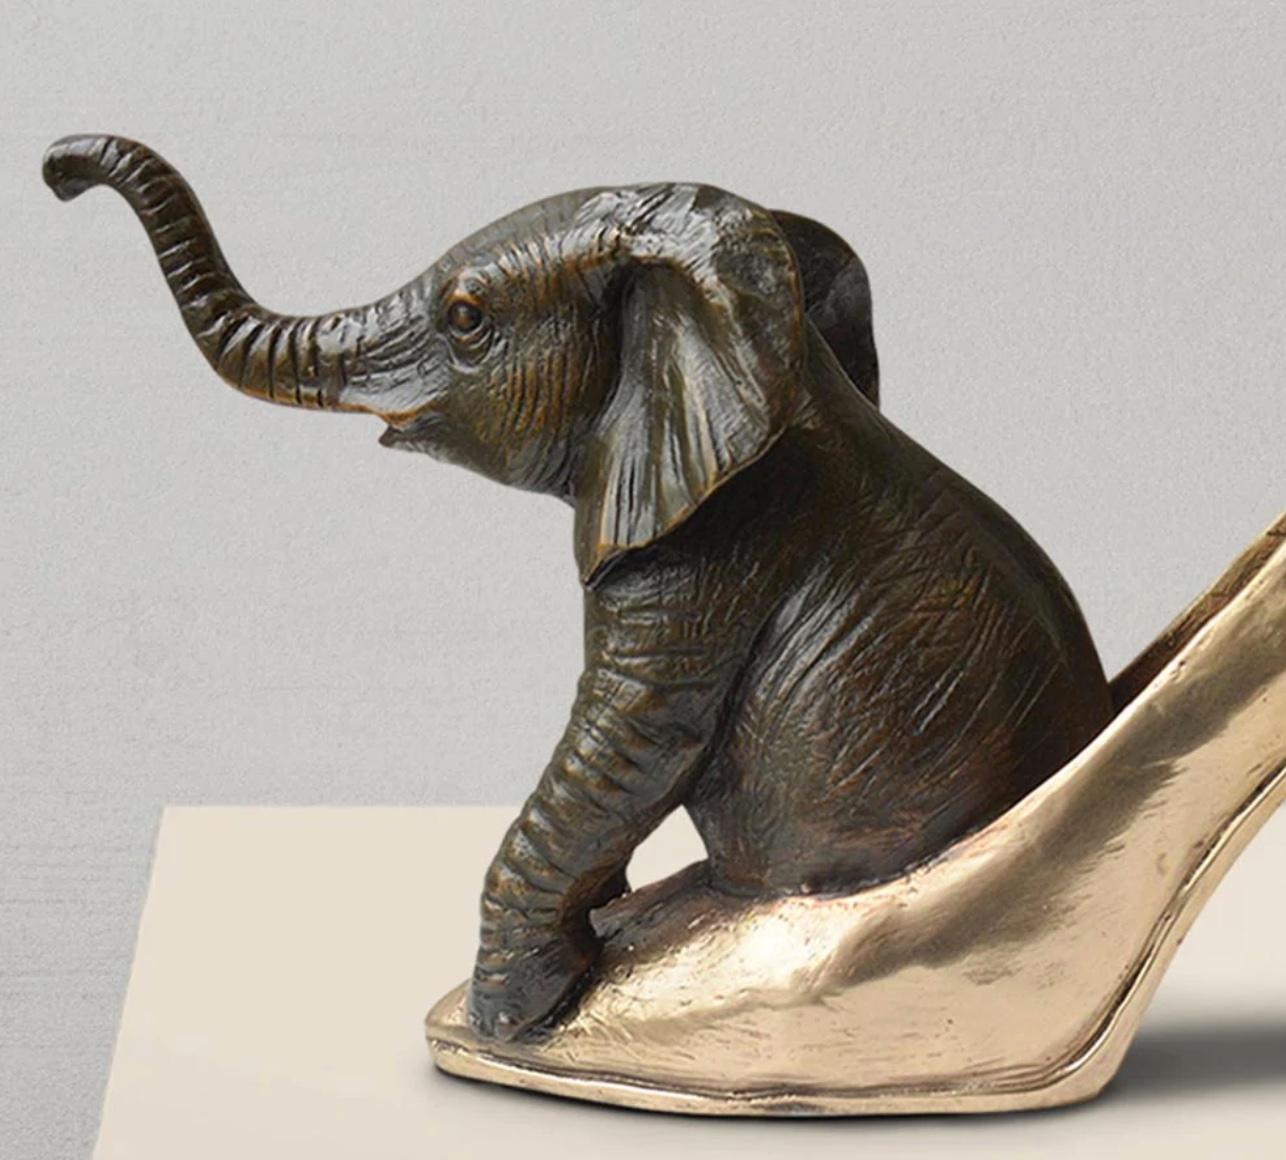 Titled: Walk With The Elephant
Authentic Bronze Sculpture

This authentic bronze sculpture titled 'Walk With The Elephant' by artists Gillie and Marc has been meticulously crafted in bronze. It features a Hippo standing on a gold patina flower and